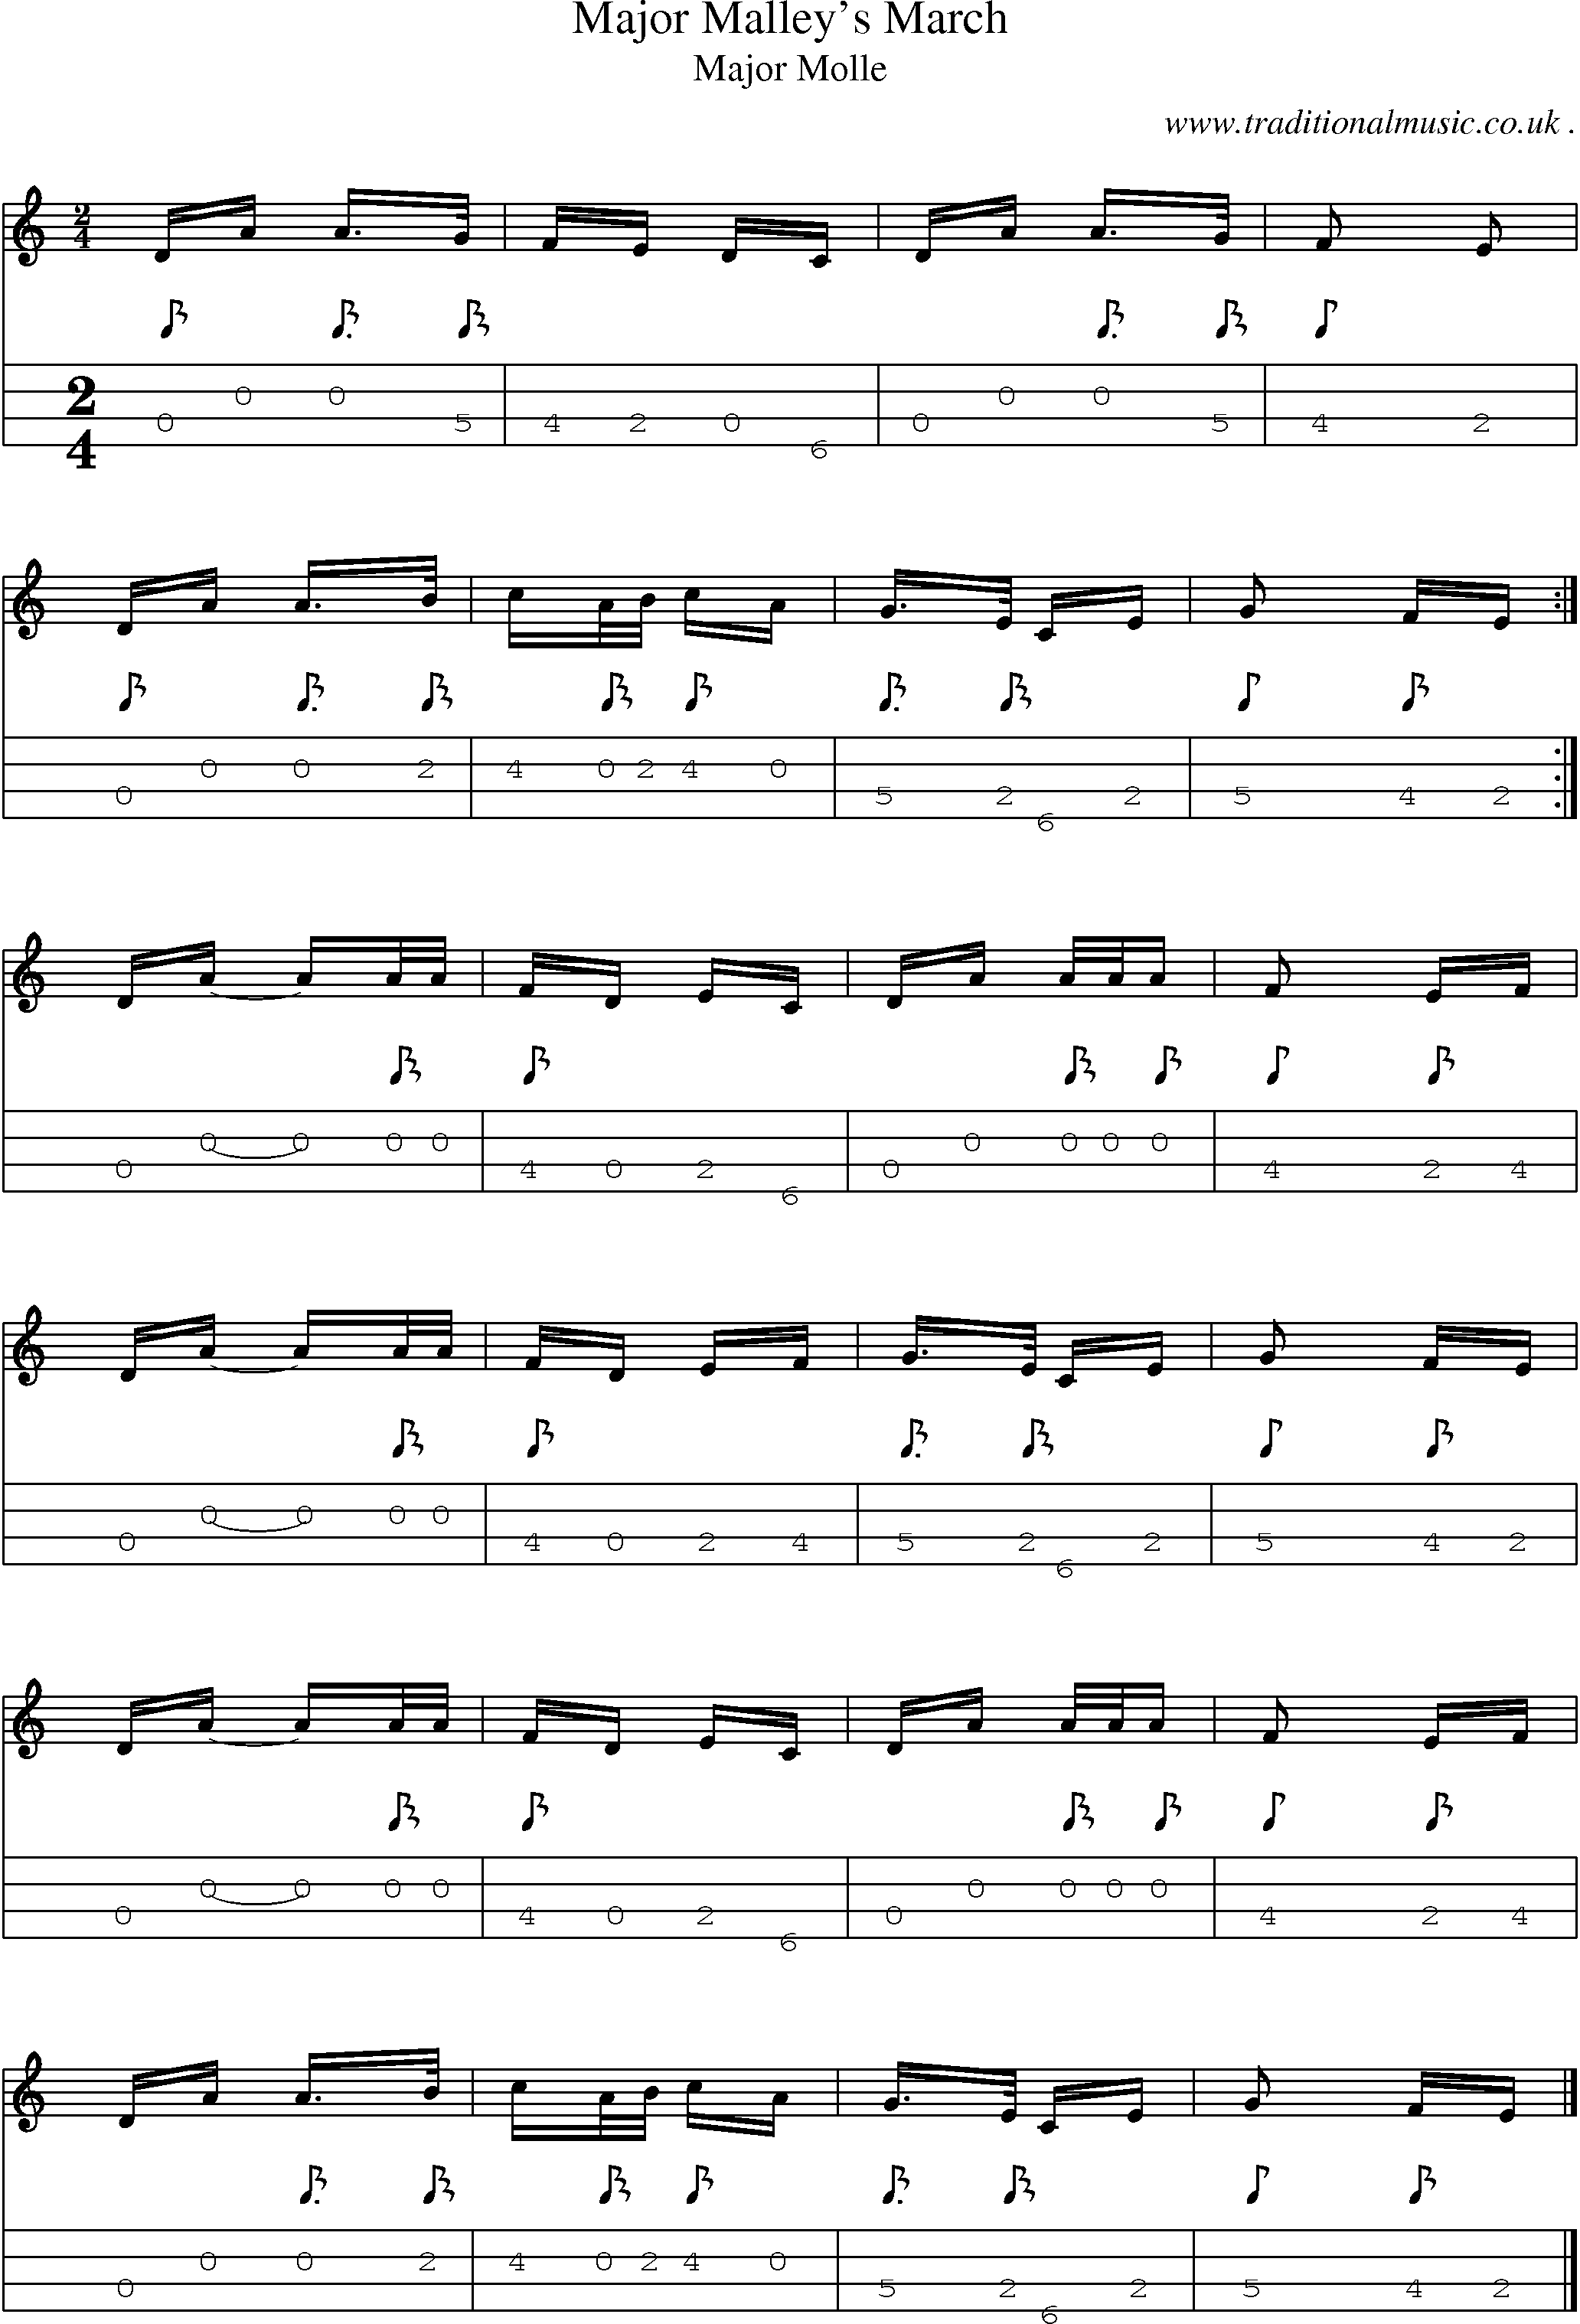 Sheet-music  score, Chords and Mandolin Tabs for Major Malleys March